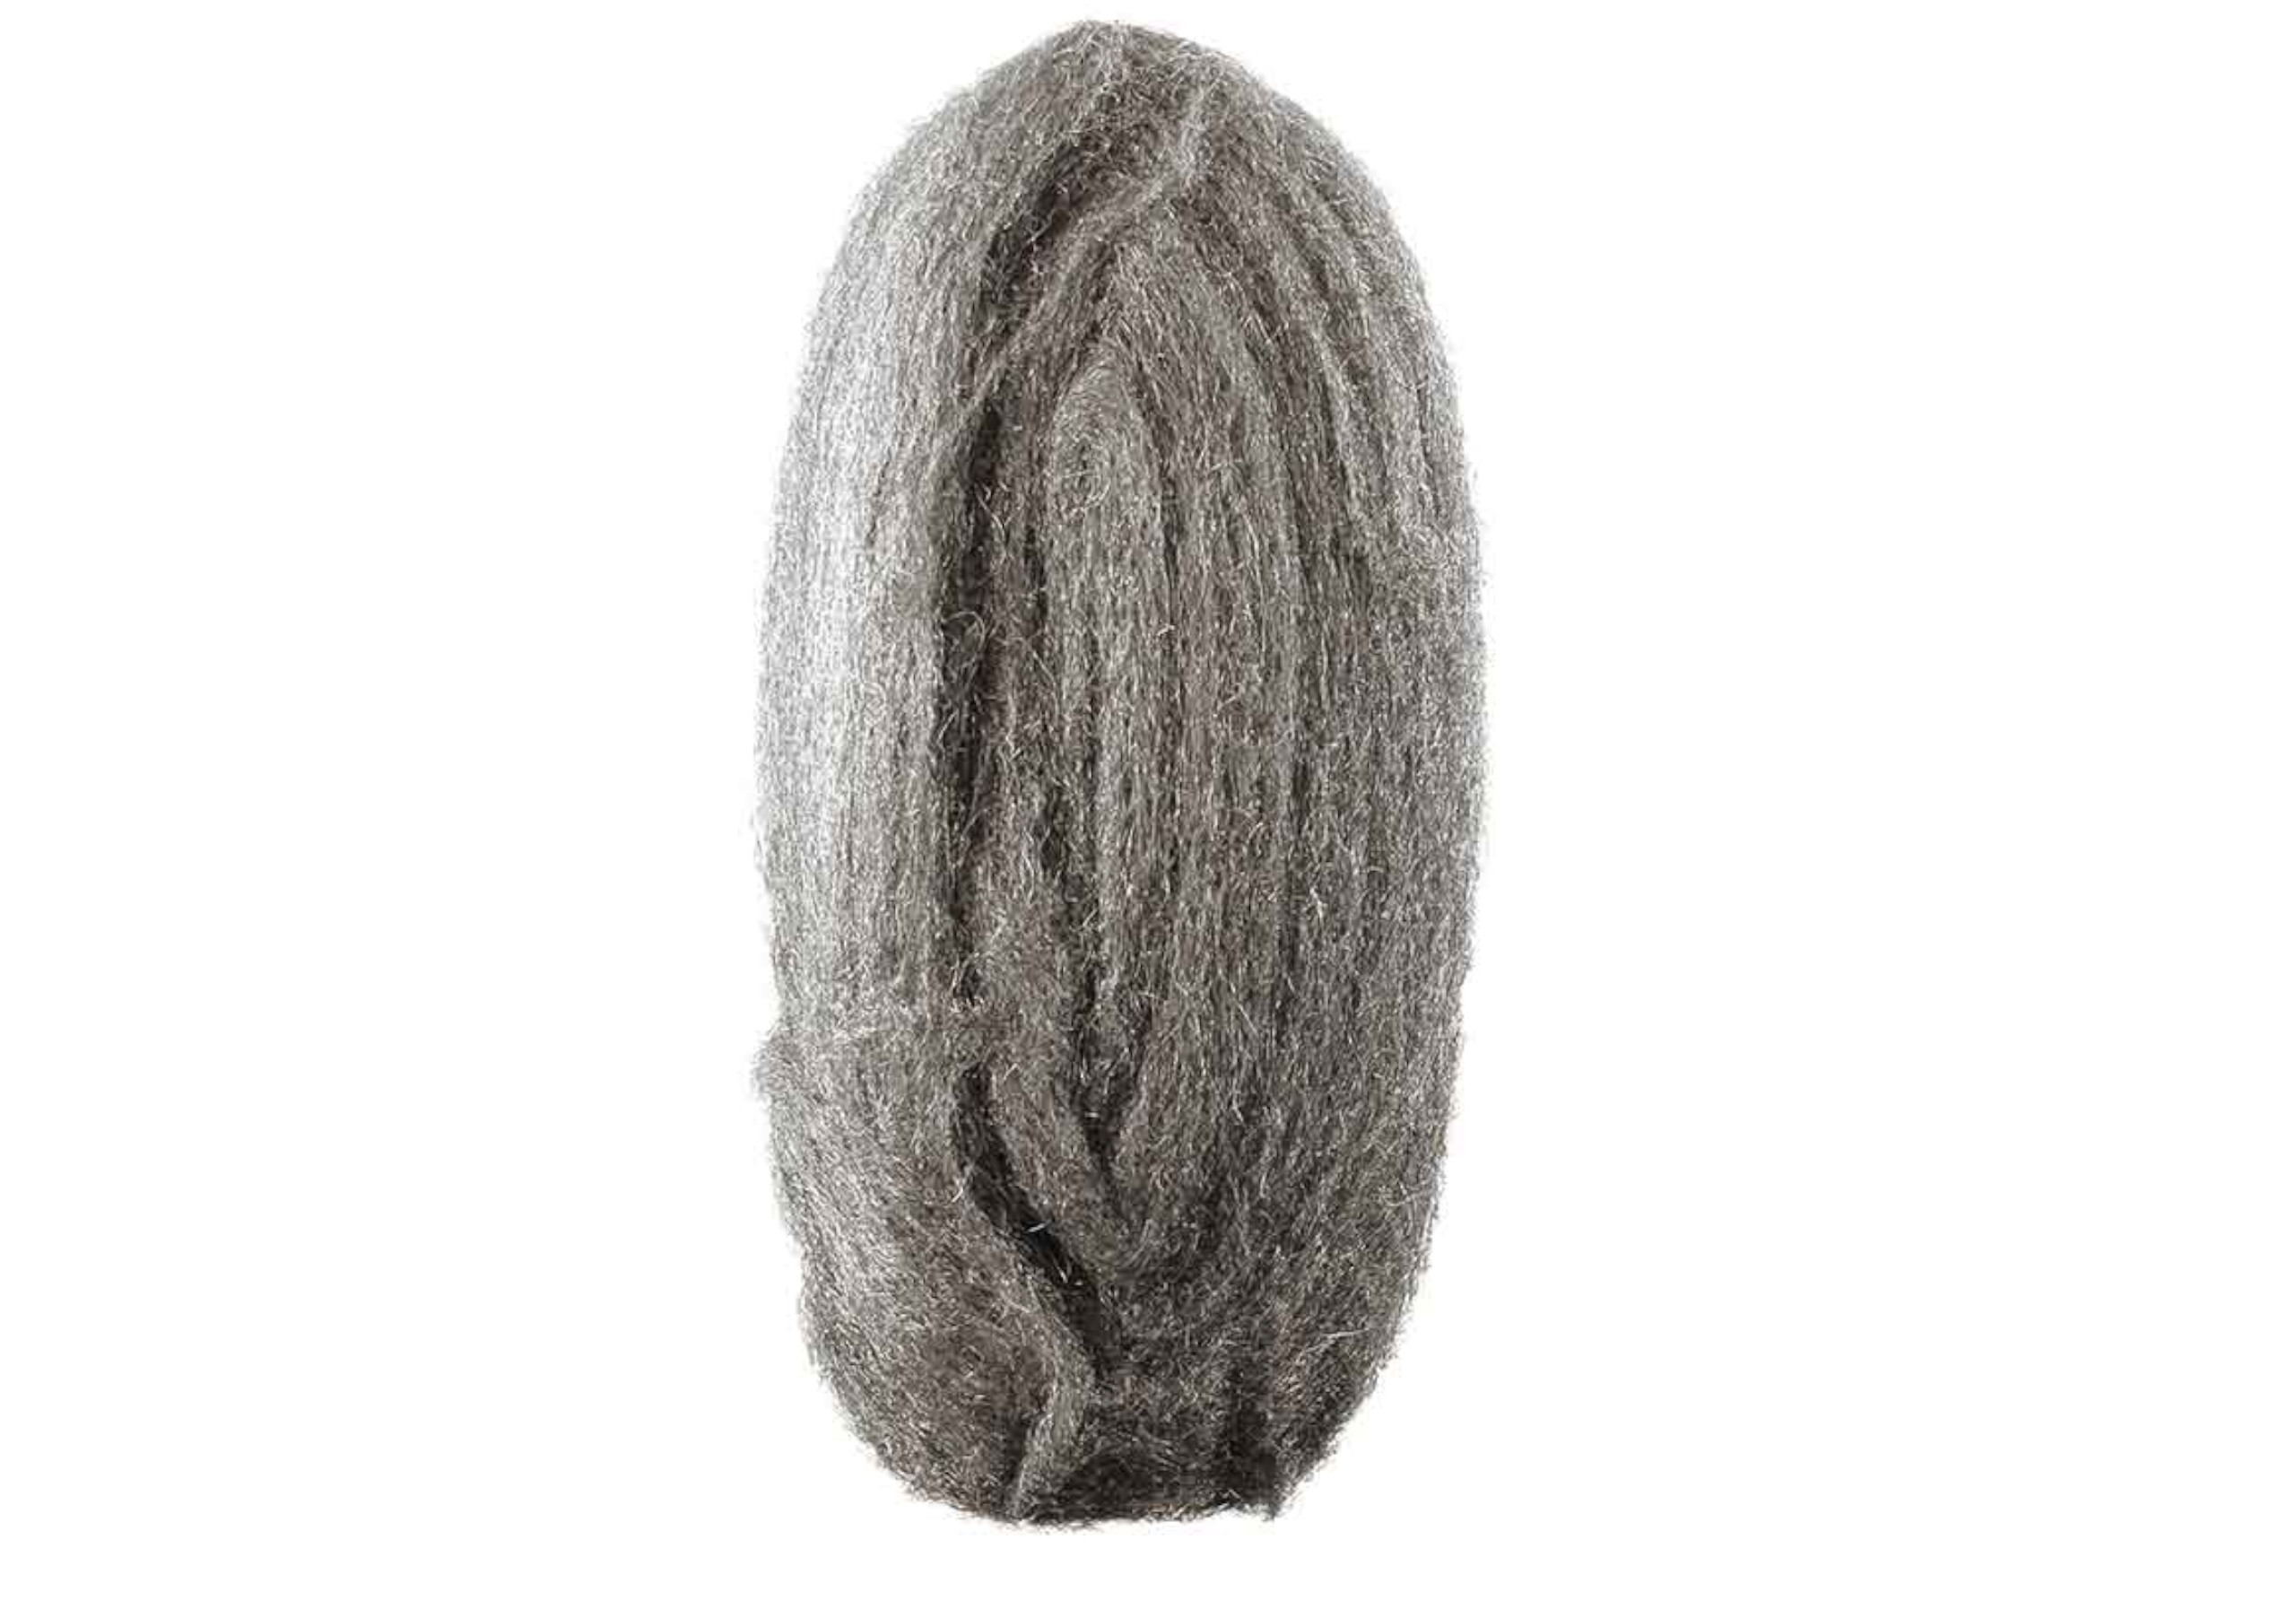 This is an image of our Steel Wool